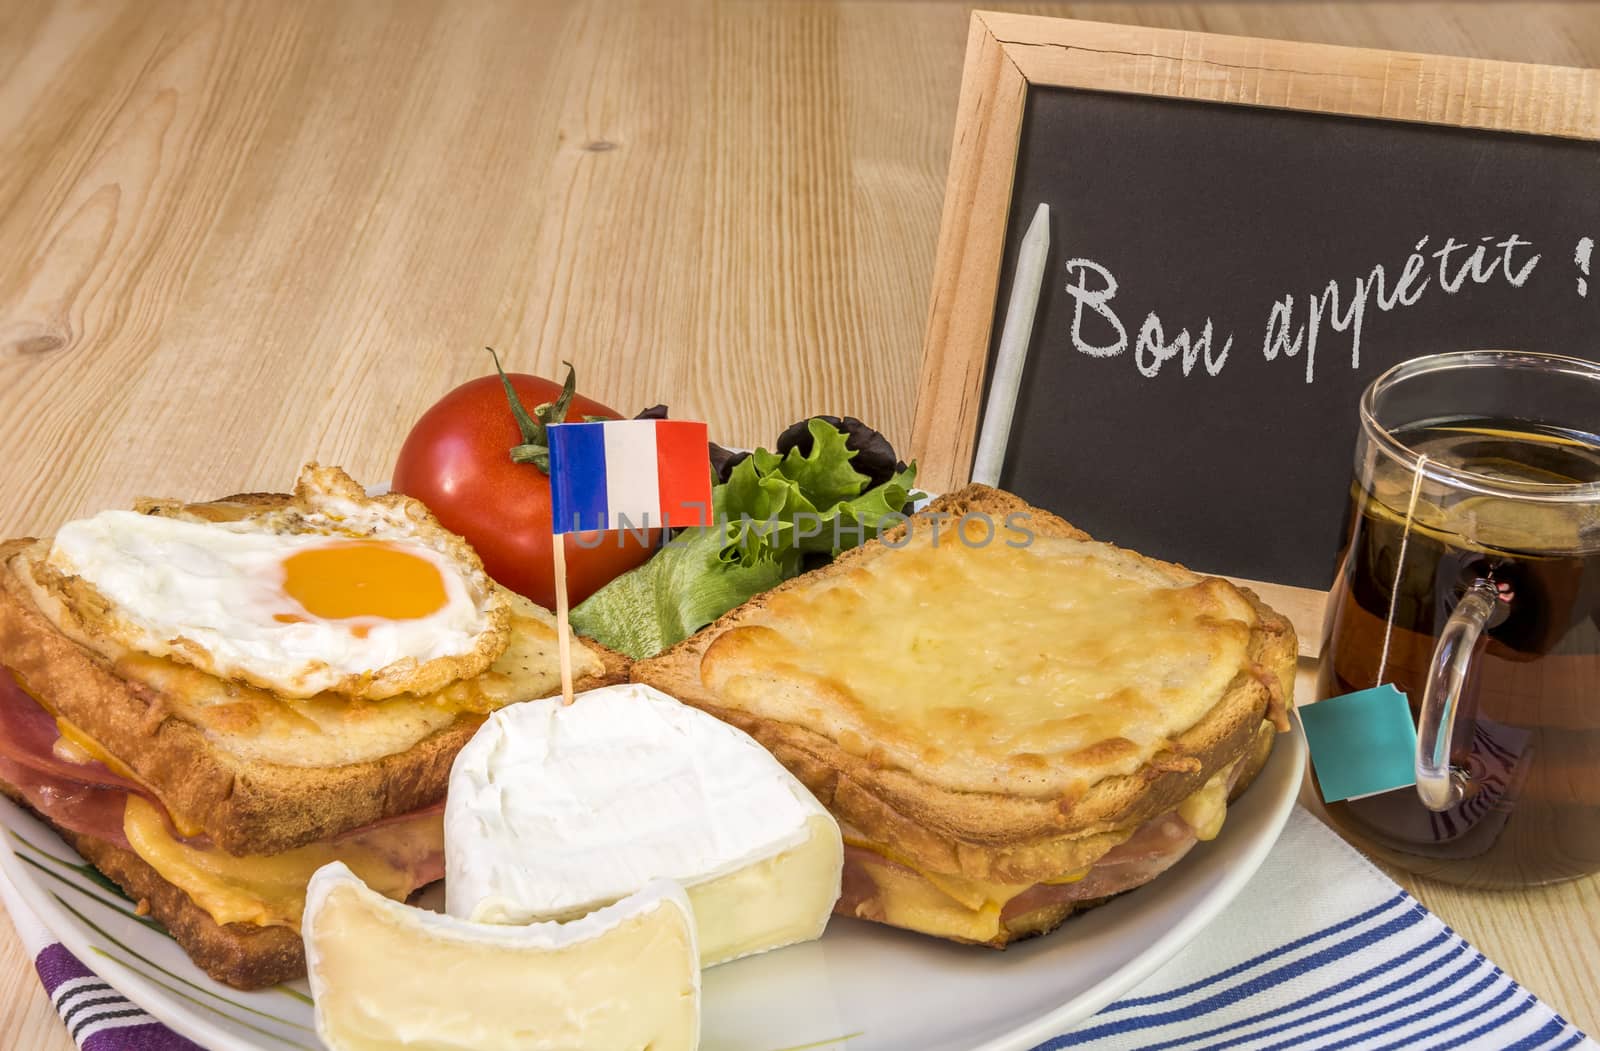 Traditional french sandwiches, croque madame and croque monsieur, fine cheese and fresh salad, placed on table and near it a chalkboard with the message of bon appetit.